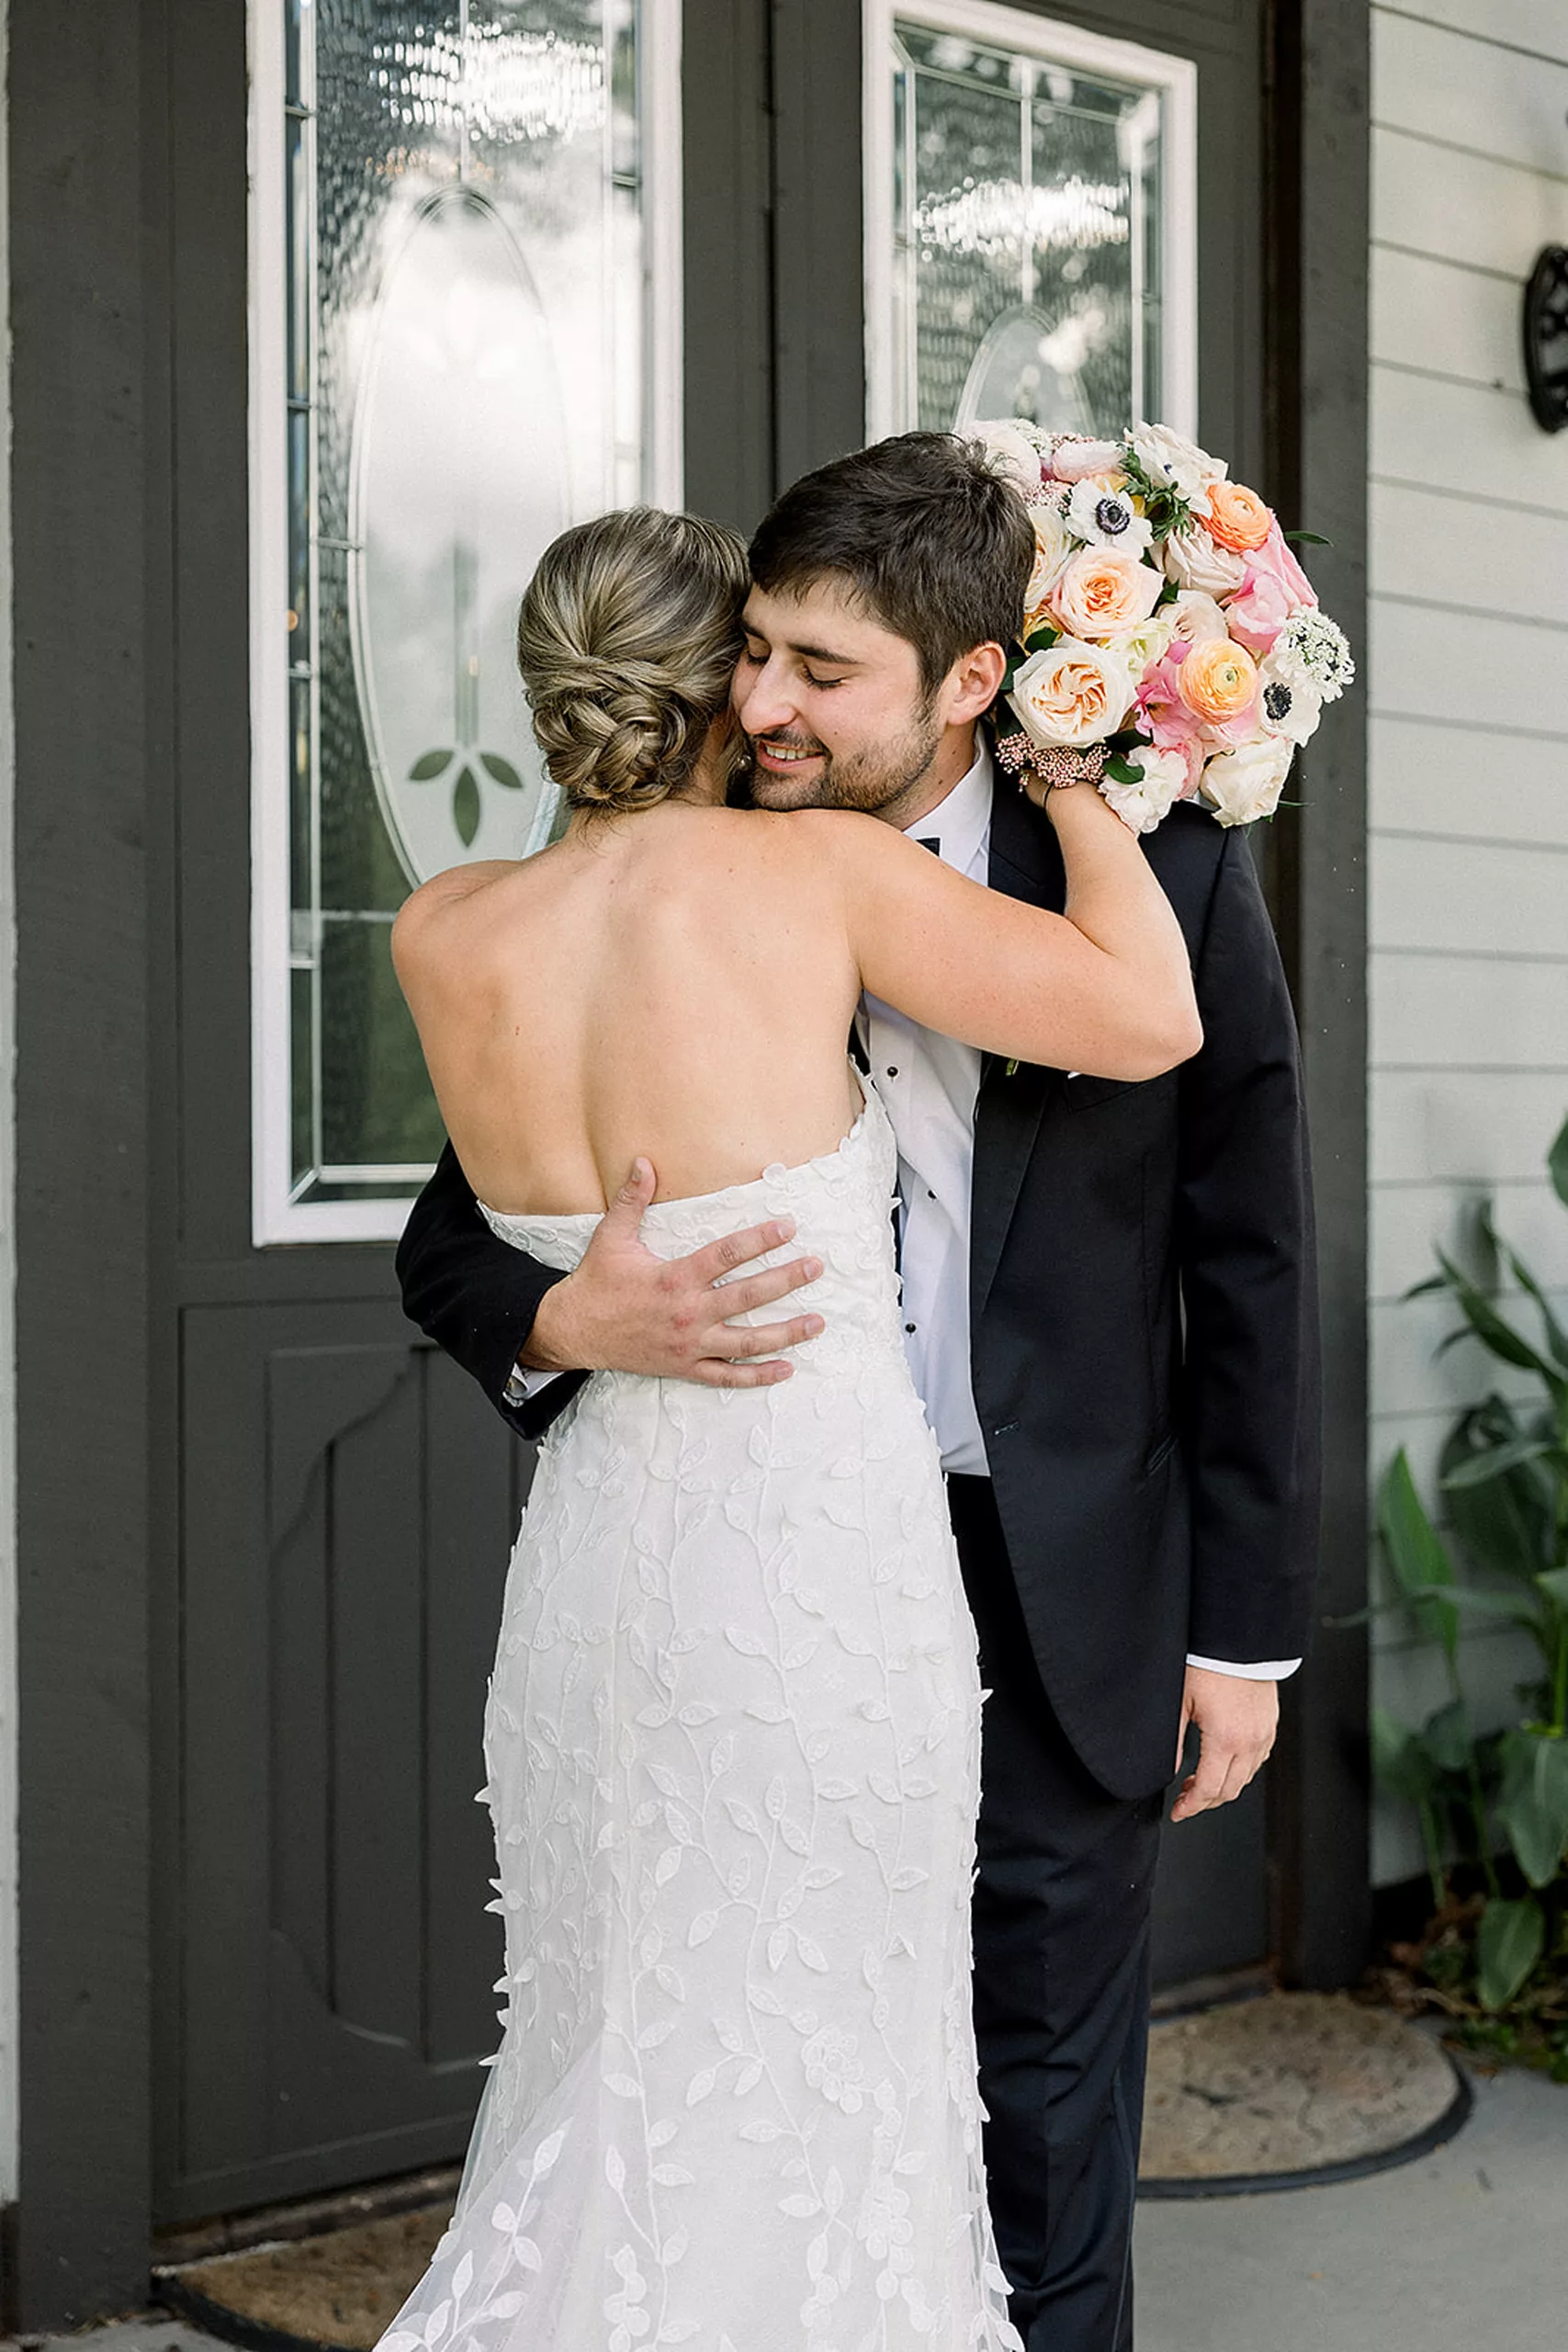 A groom hugs his bride in her embroidered dress on a porch after seeing her for the first time in her dress